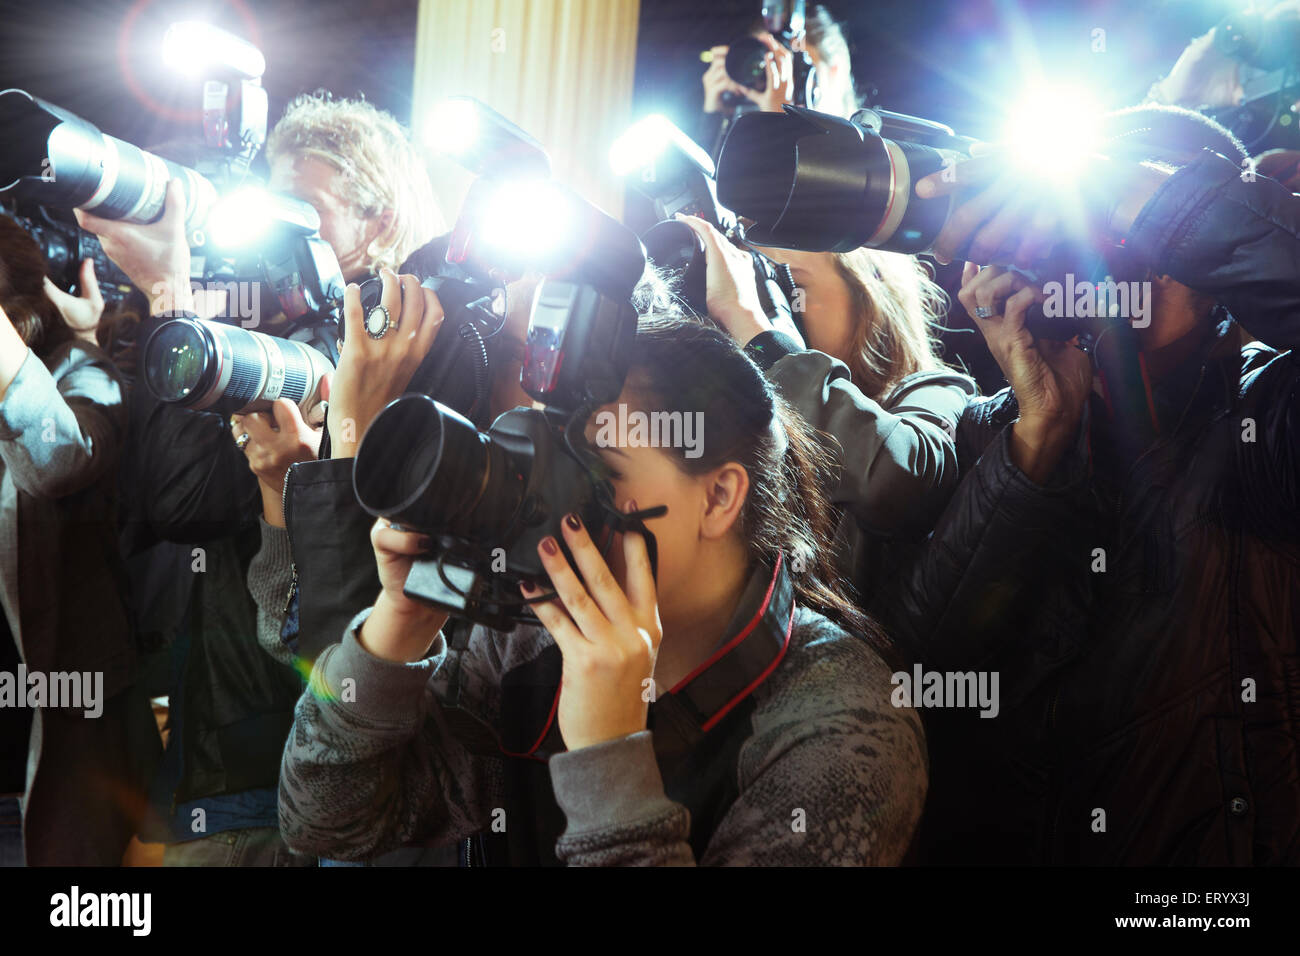 Paparazzi photographing event Banque D'Images